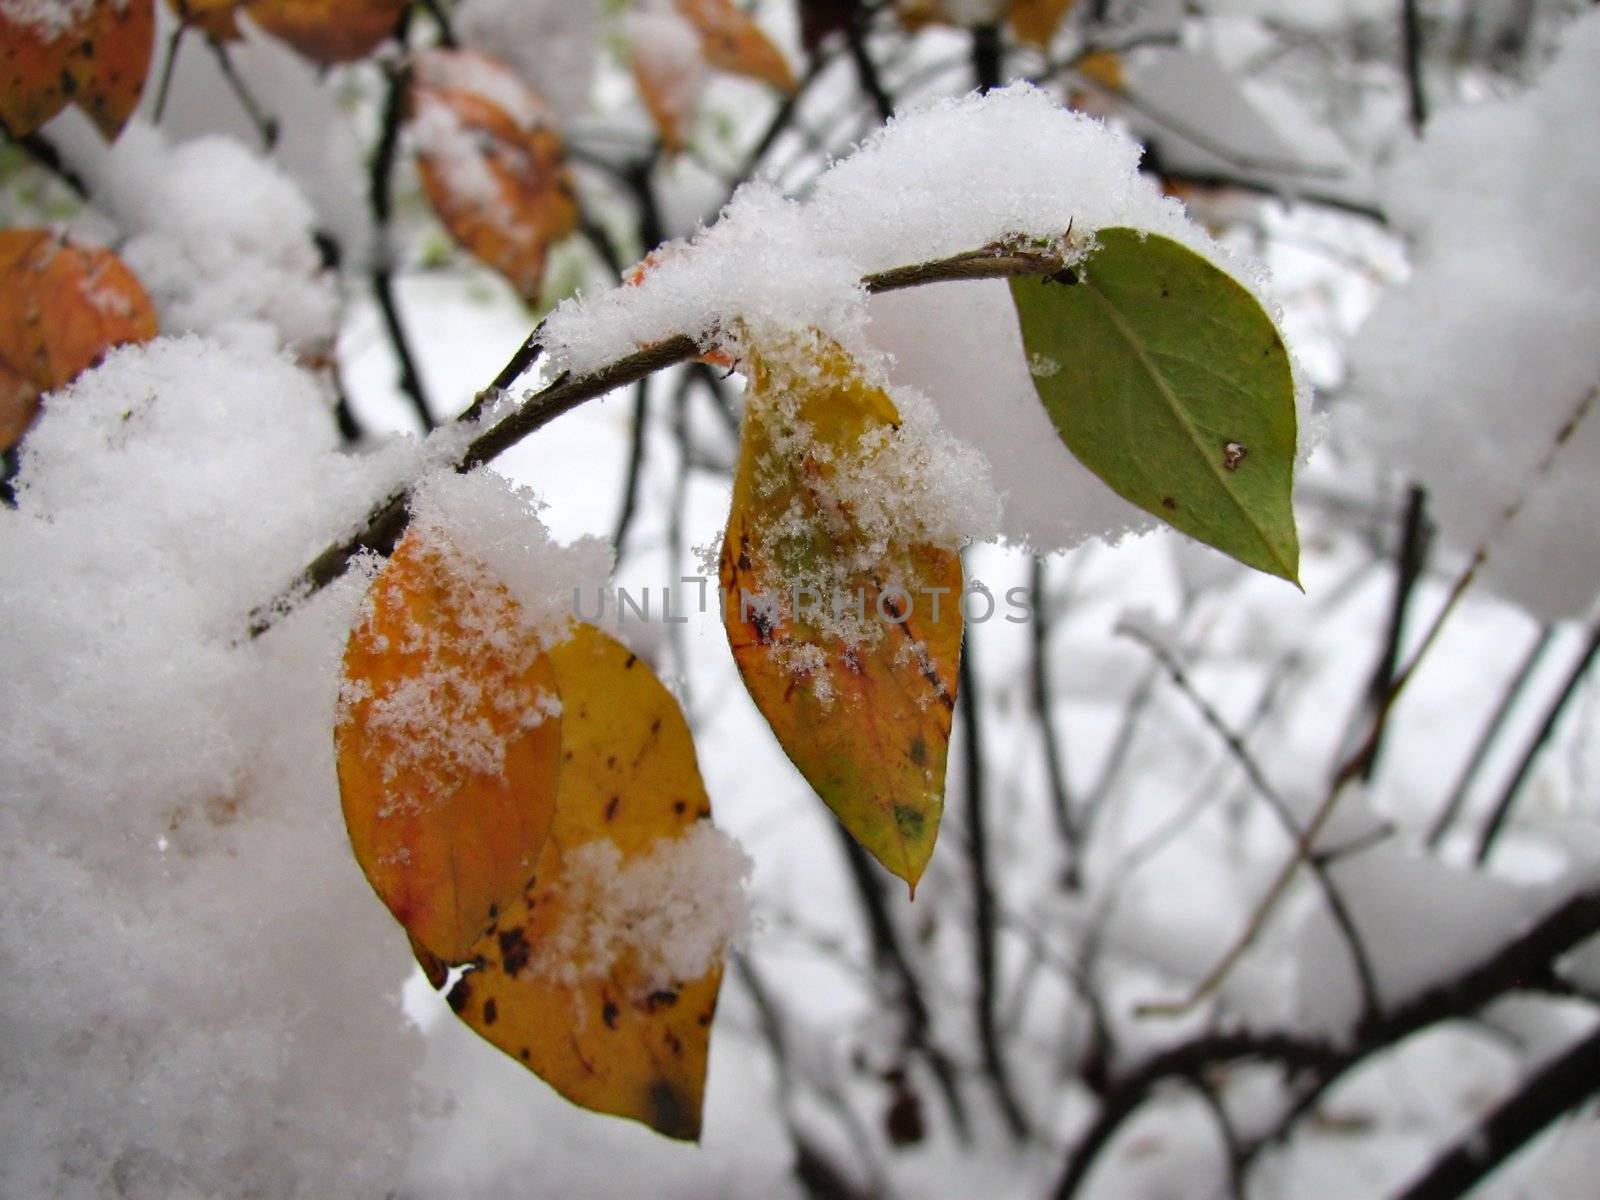 The yellow and green leaves under the first snow